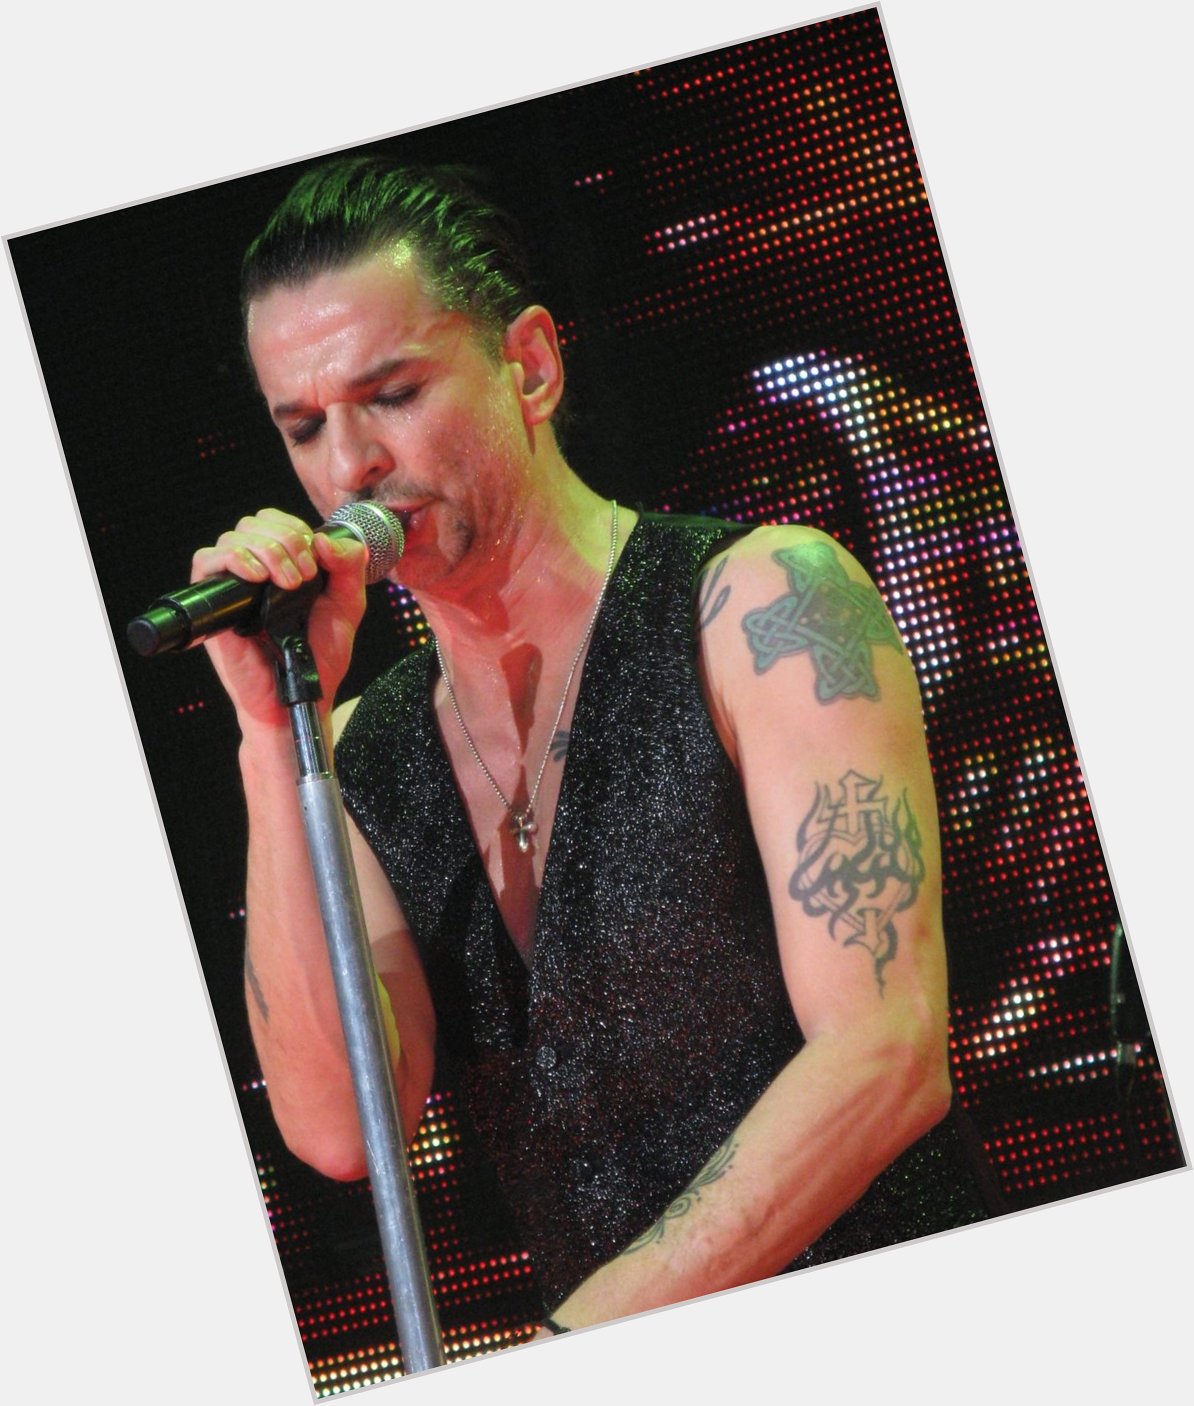 Happy Birthday to Depeche Mode\s David Gahan, born on this day in 1962.

Photo: Noa Hassin. 